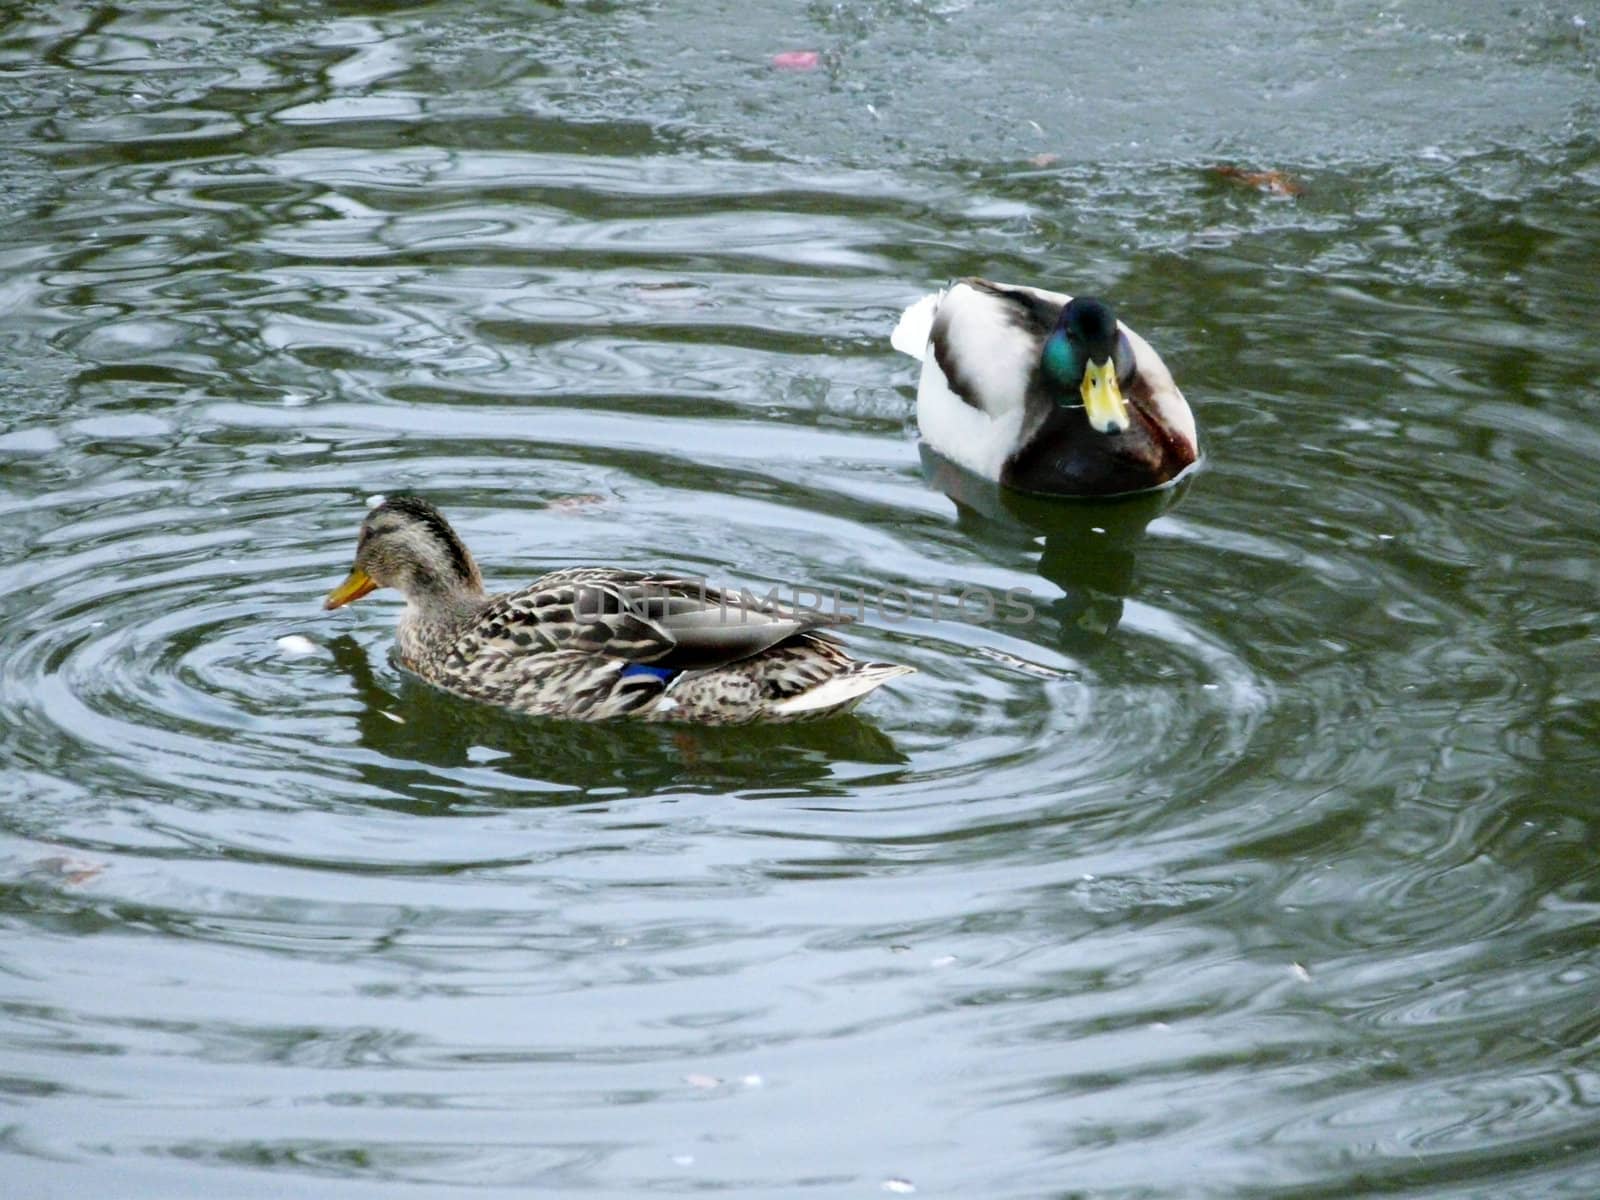 Two birds, choosing to rest on a small urban pond before a long flight